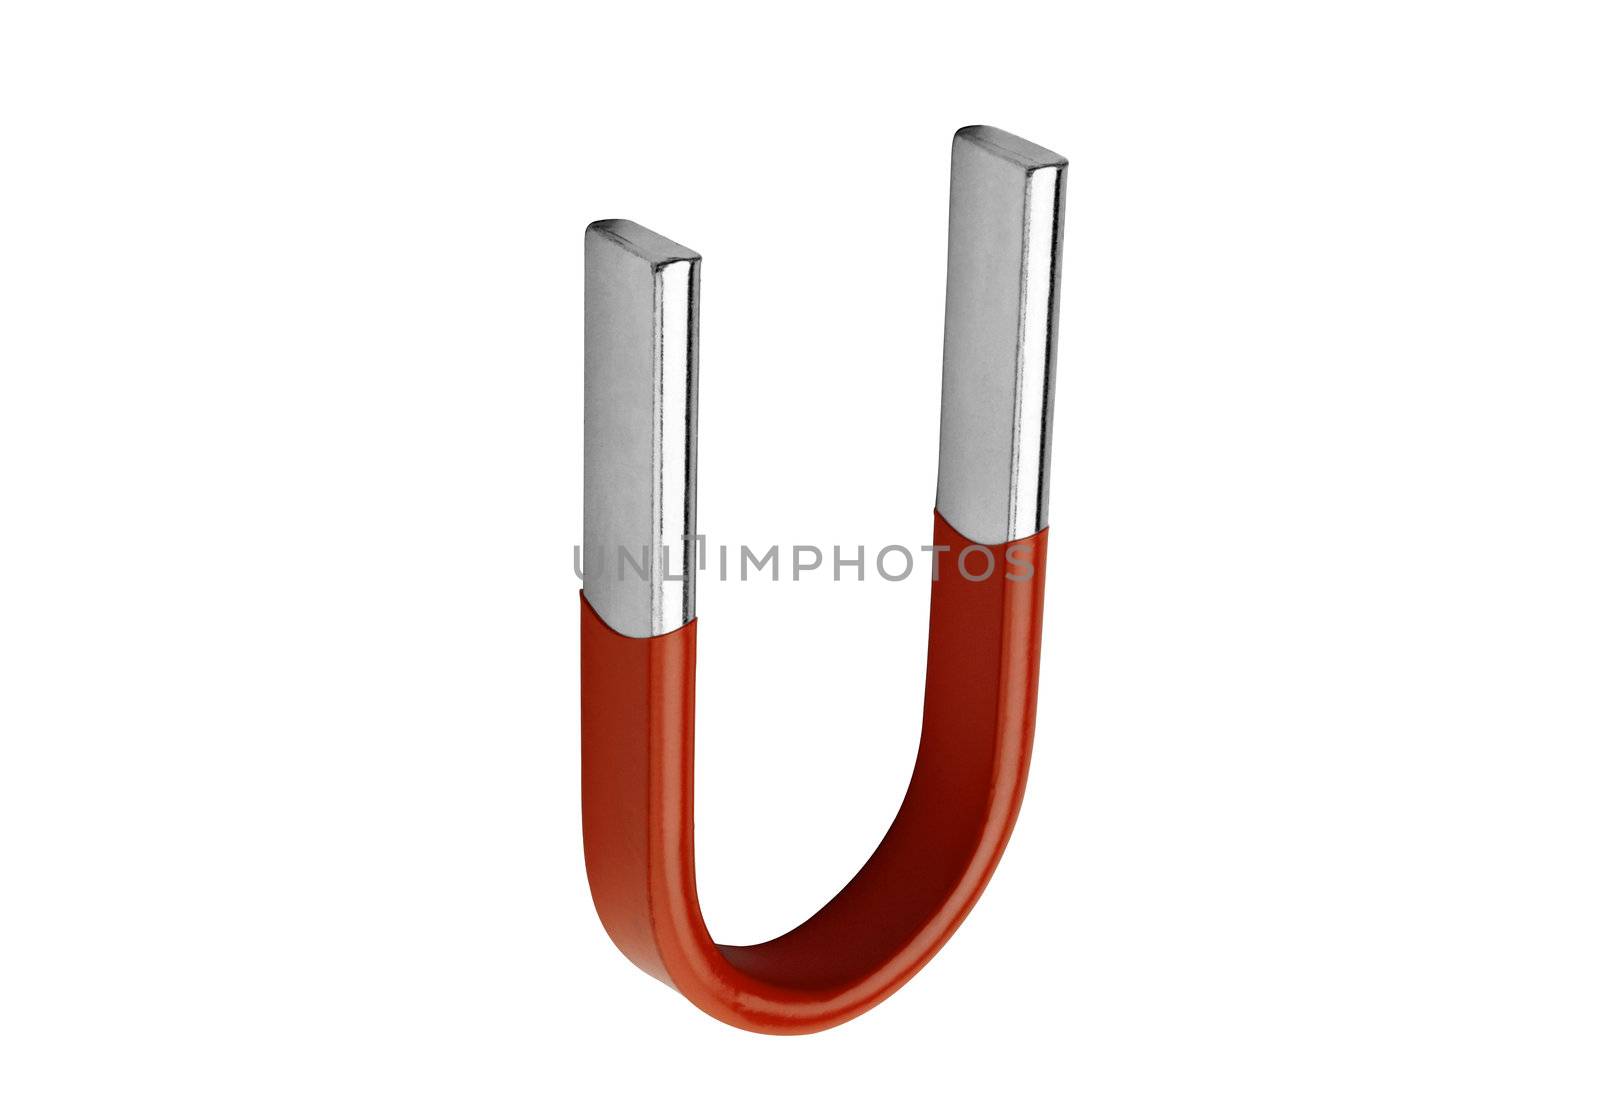 A horseshoe magnet over a white background for you